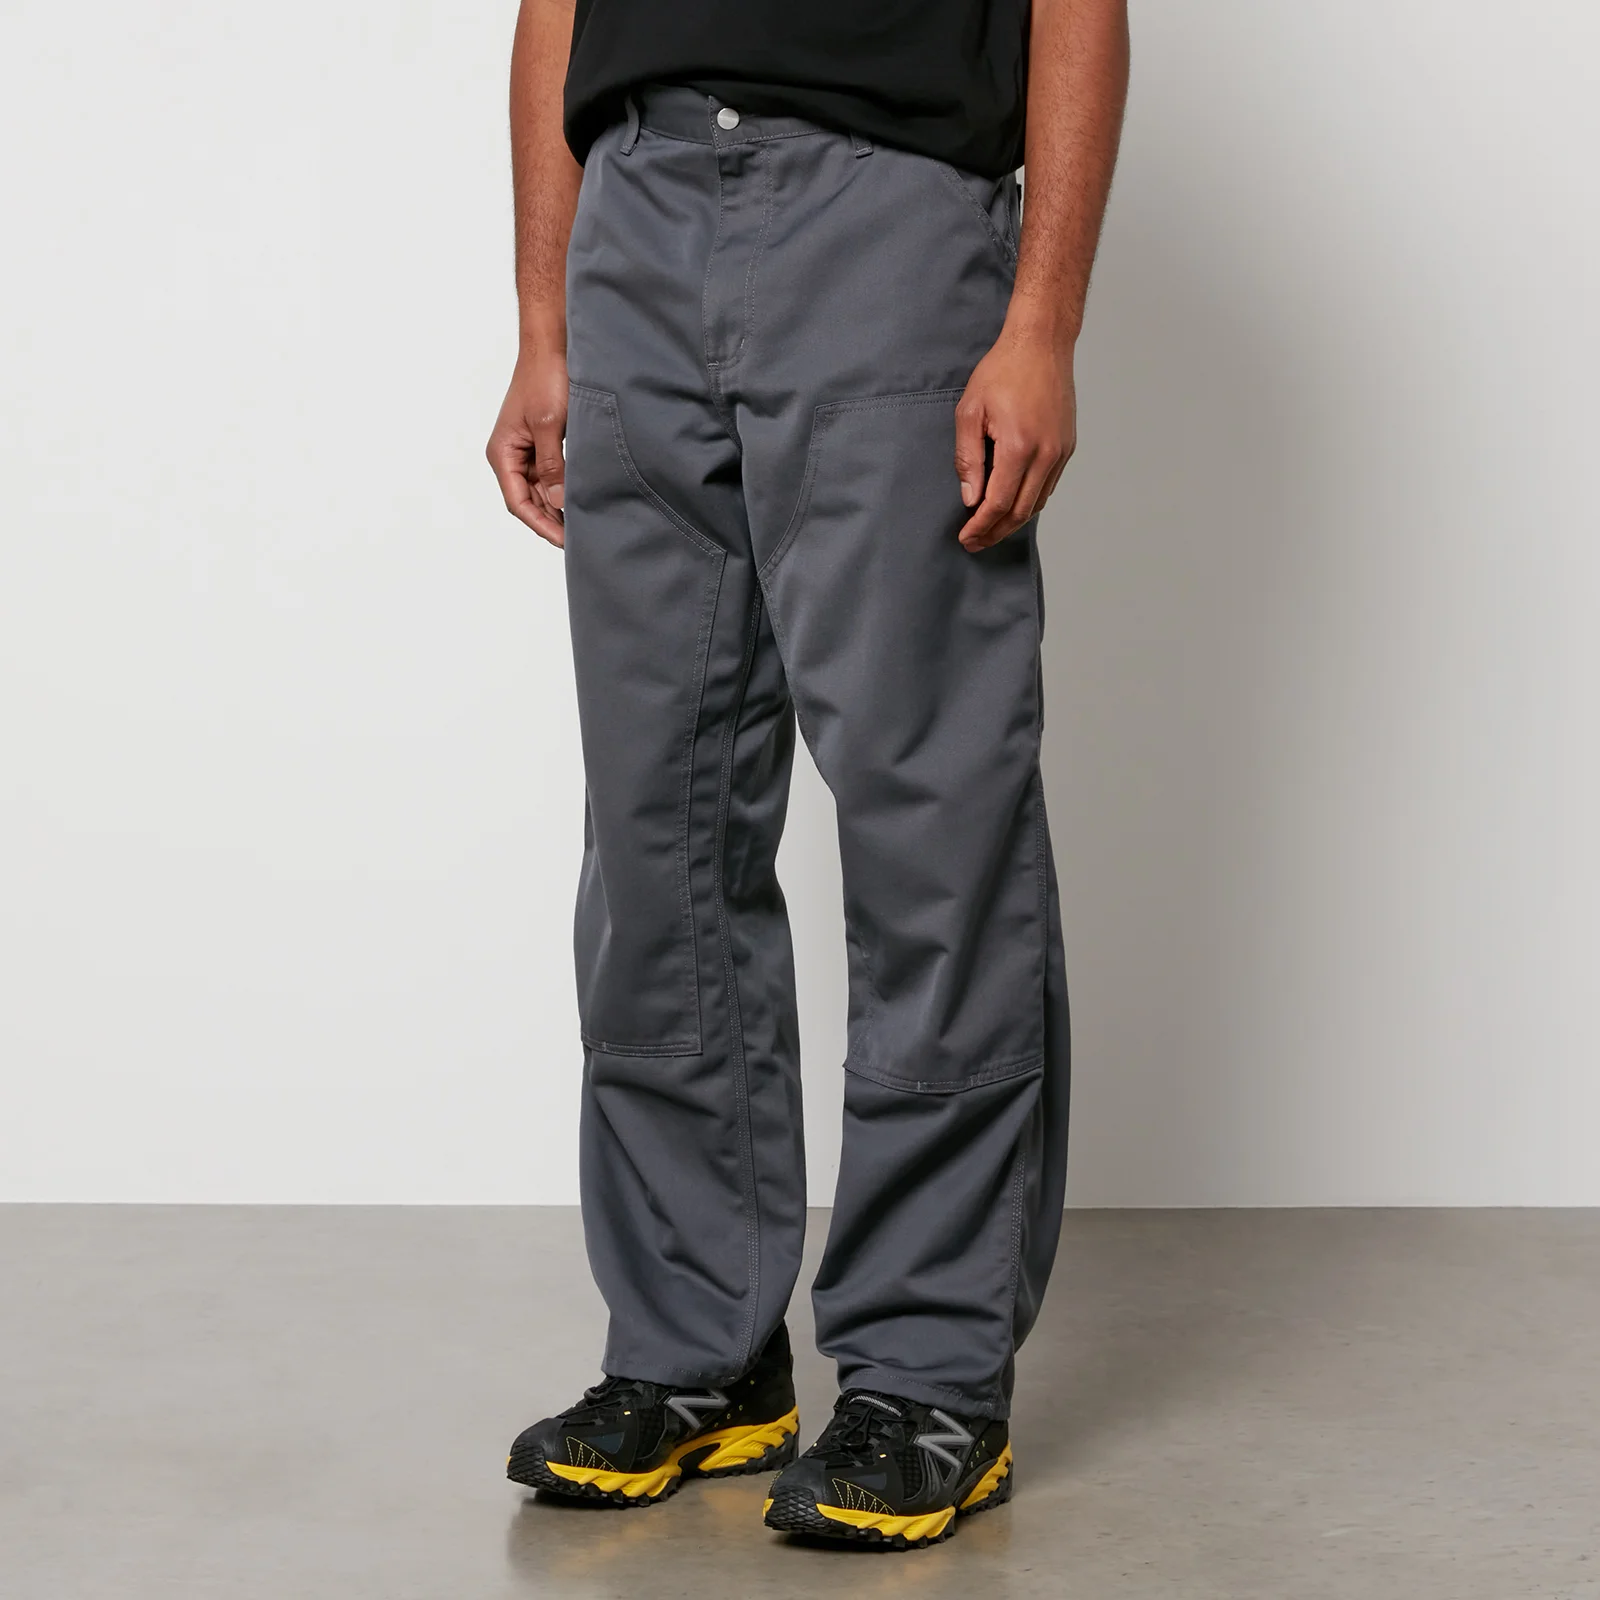 Carhartt WIP Double Knee Cotton-Twill Trousers Image 1